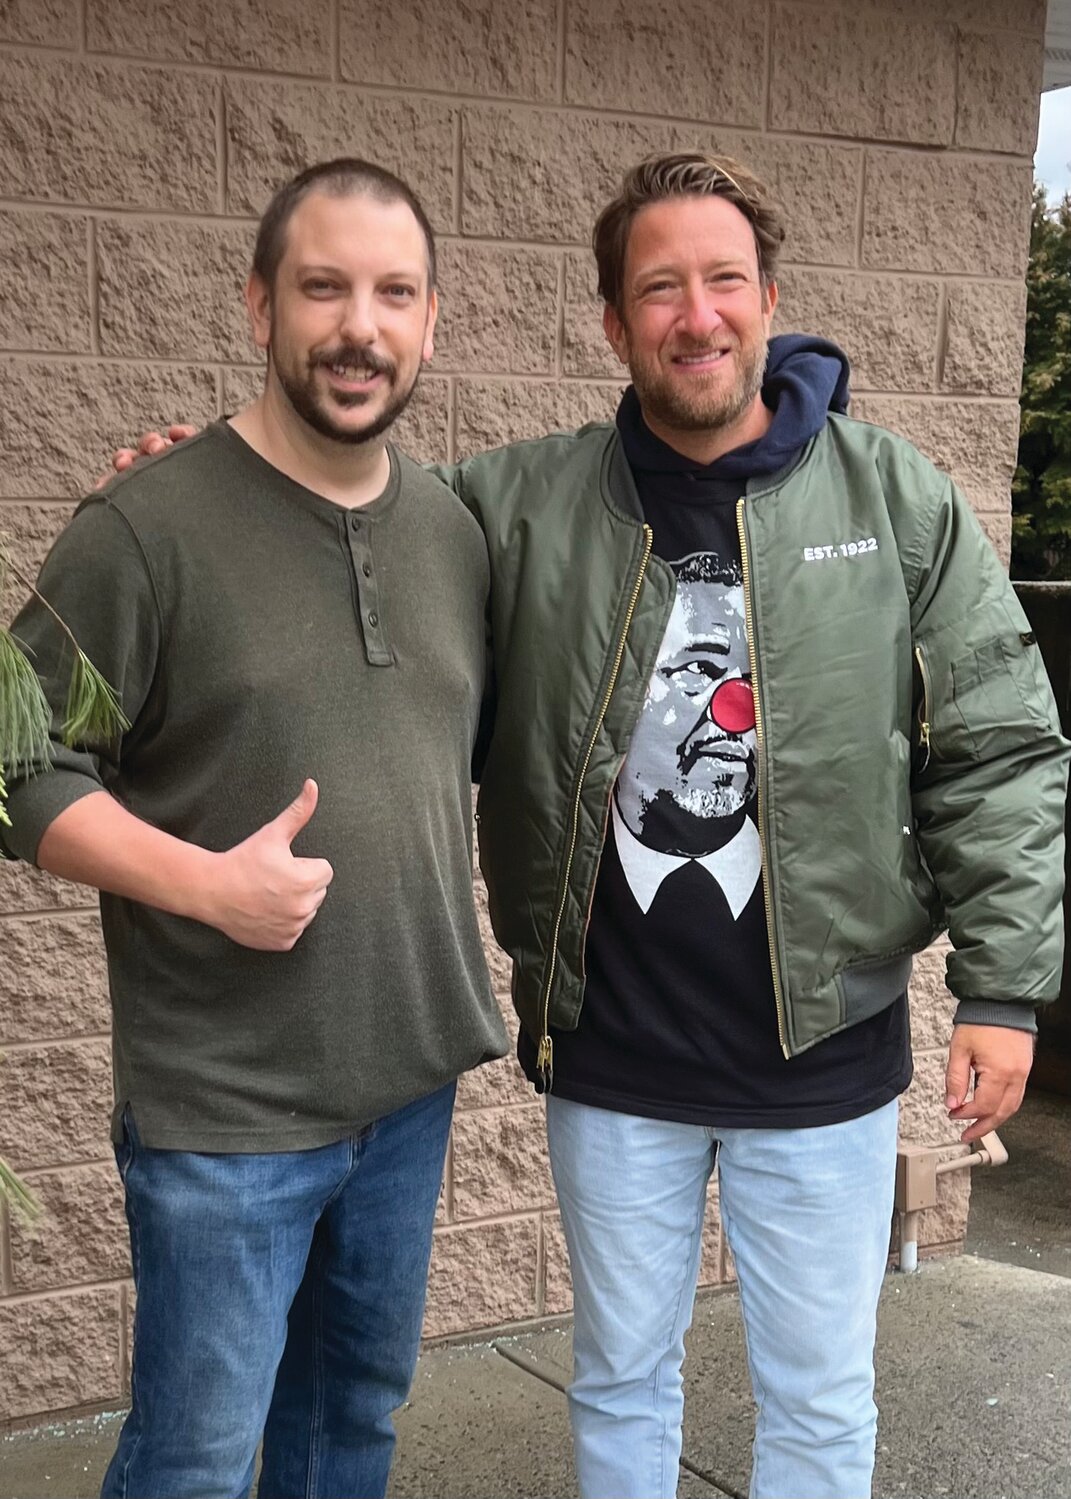 PIZZA PRAISE: Eric Palmieri, of D. Palmieri’s Bakery in Johnston, poses for a photo with Barstool Sports and One-Bite pizza reviewer Dave Portnoy after the social media celebrity stopped by for a bite last week.